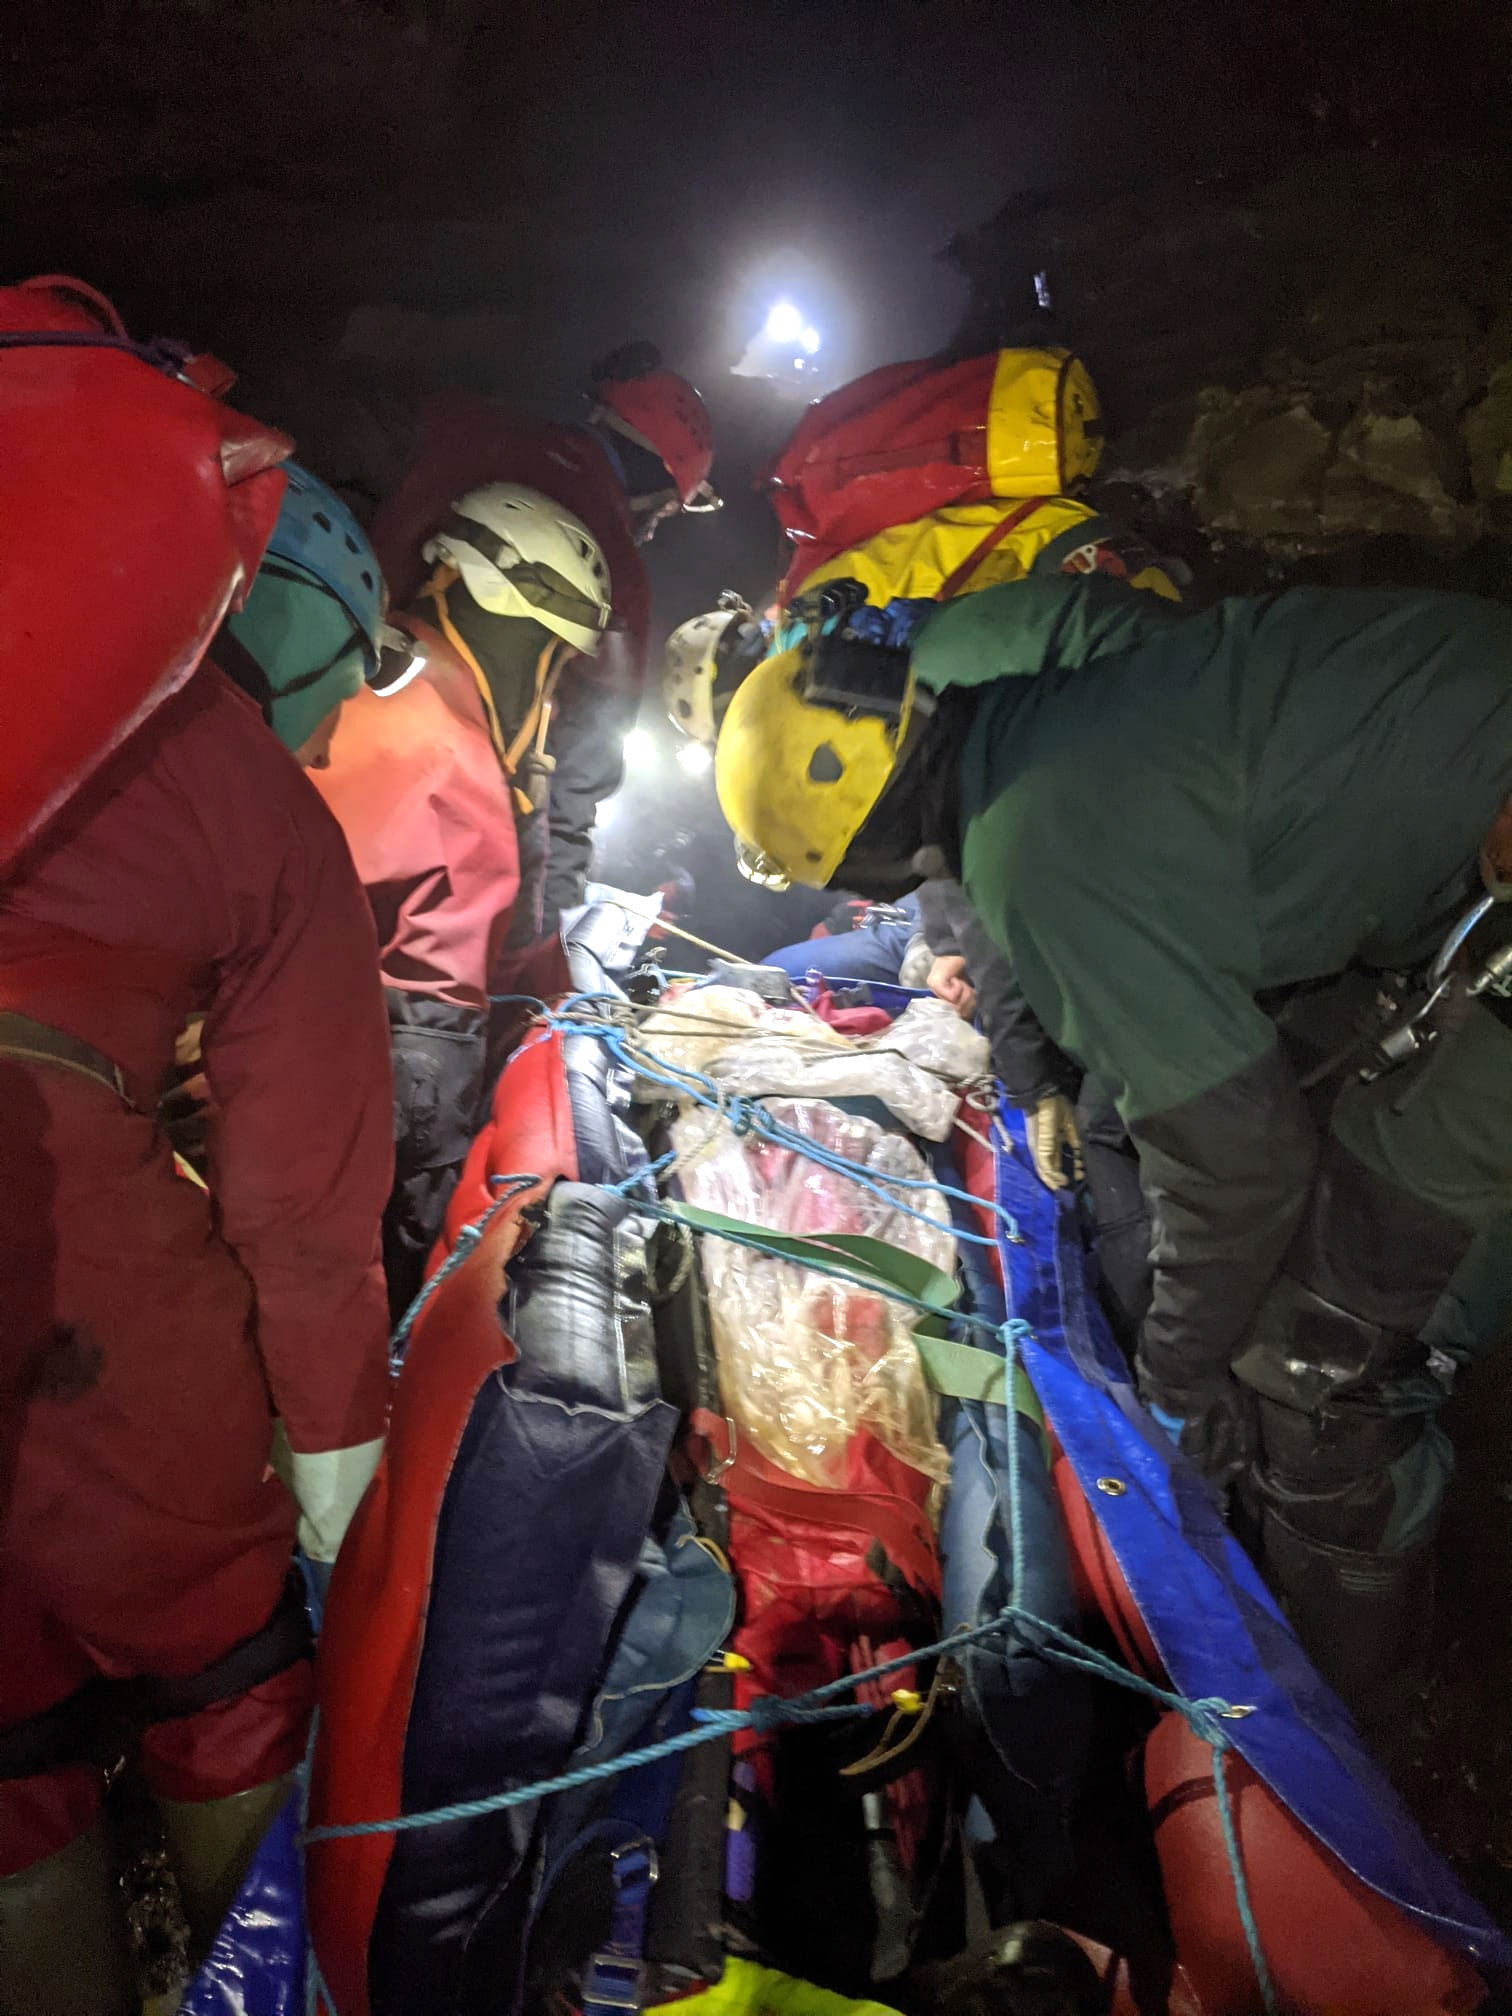 Teams spent 54 hours manoeuvring the injured caver through technically challenging terrain towards the surface.